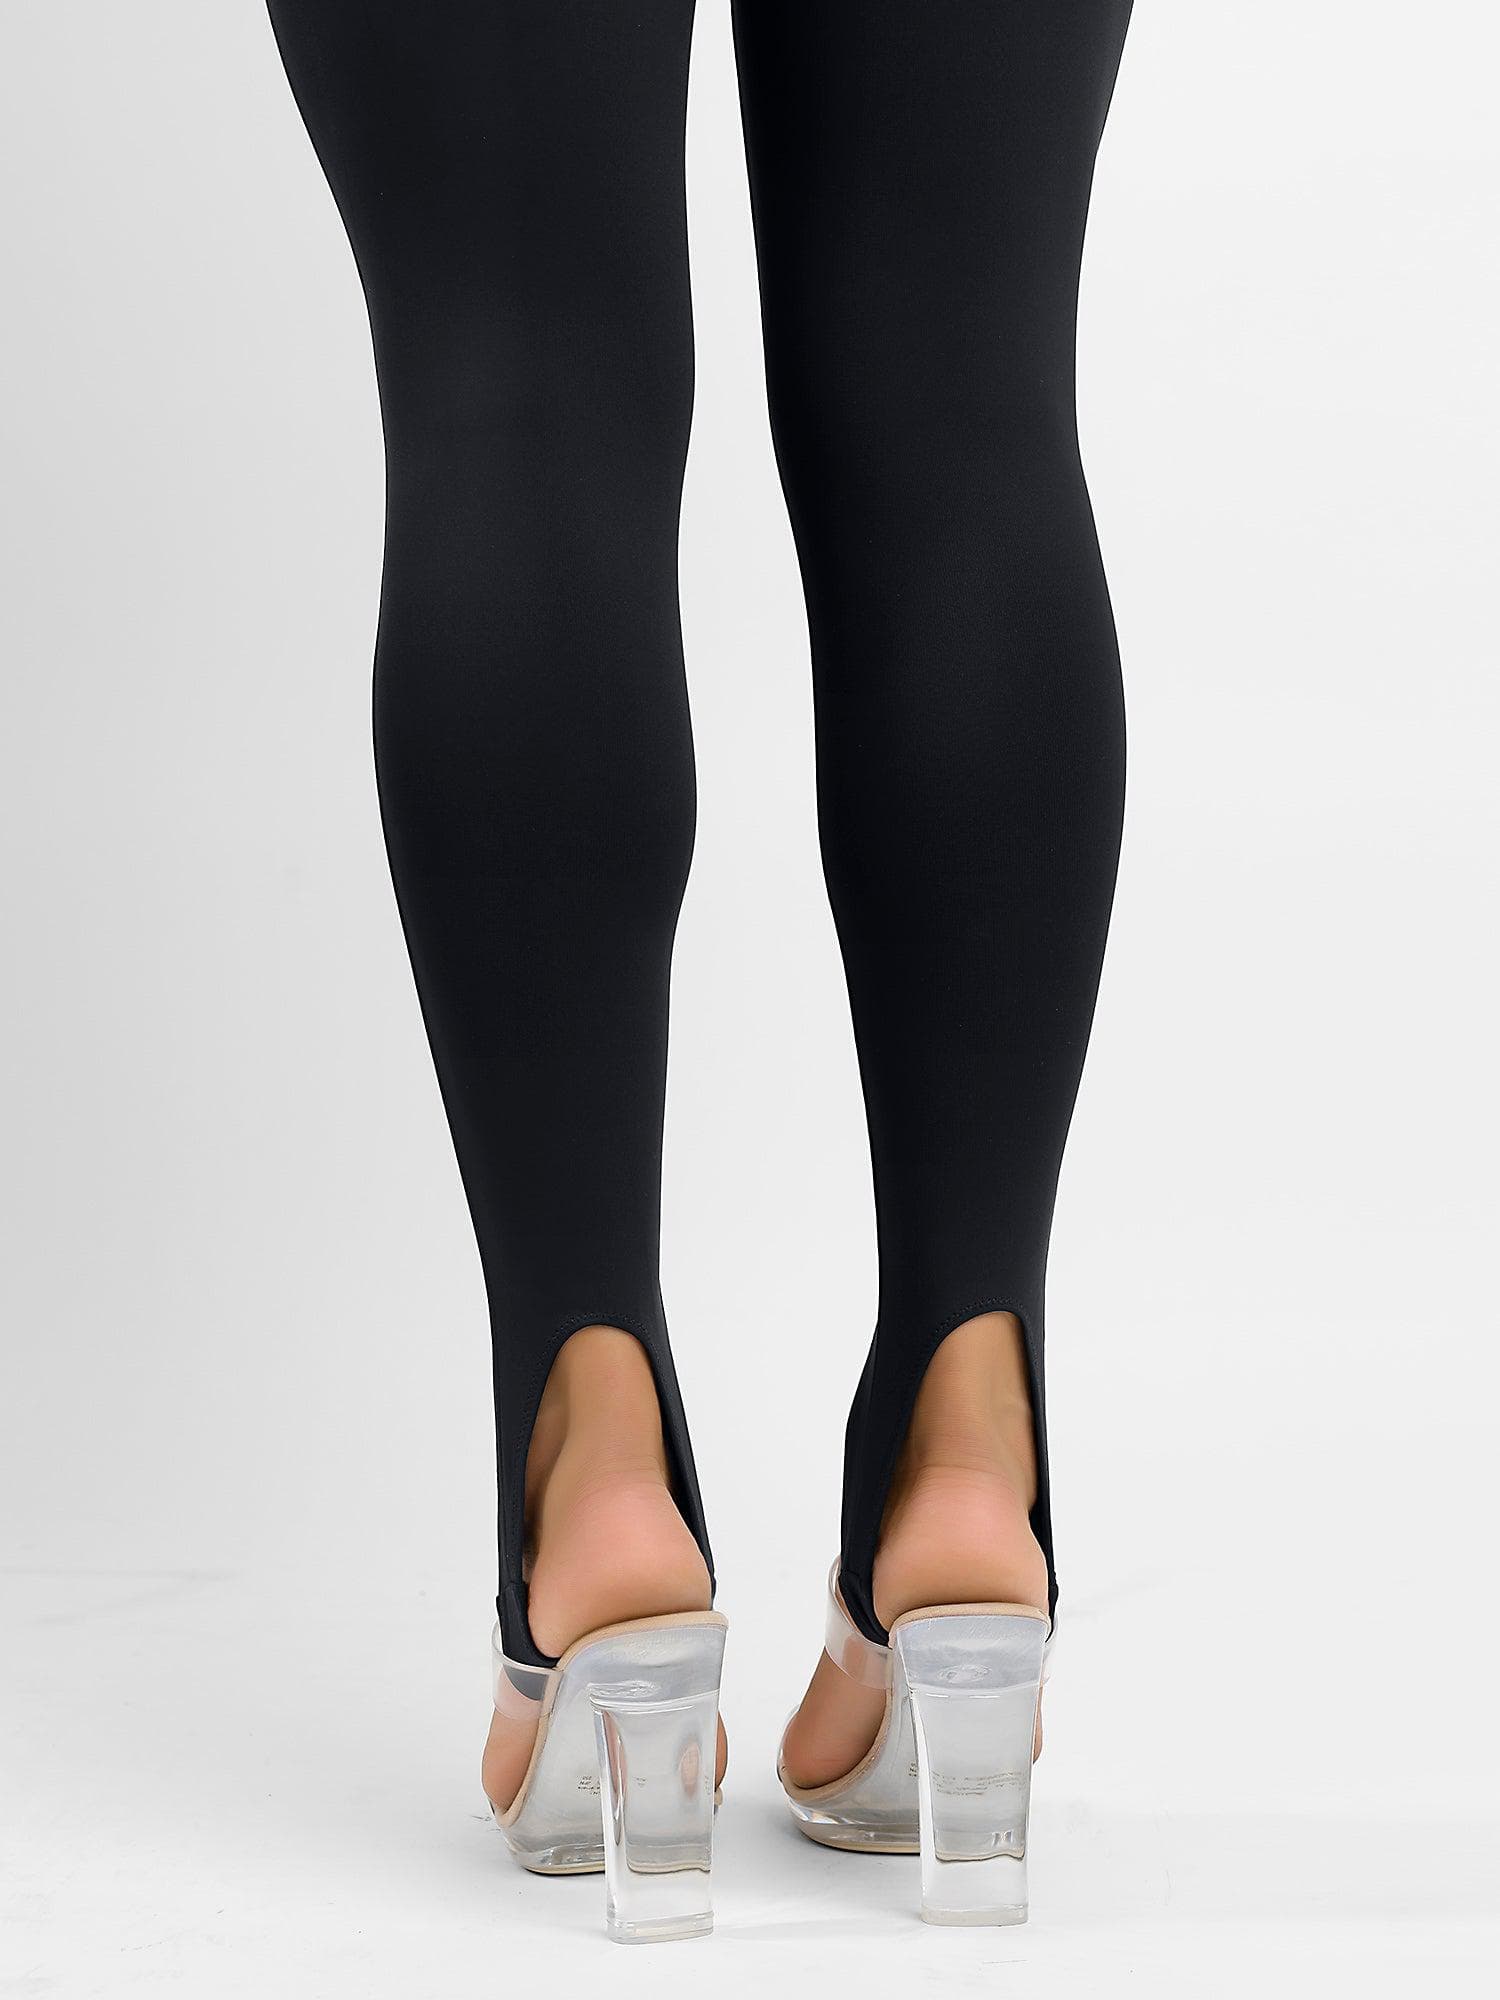 Leggings for Women UK, High Waisted Tummy Control Opaque Sports